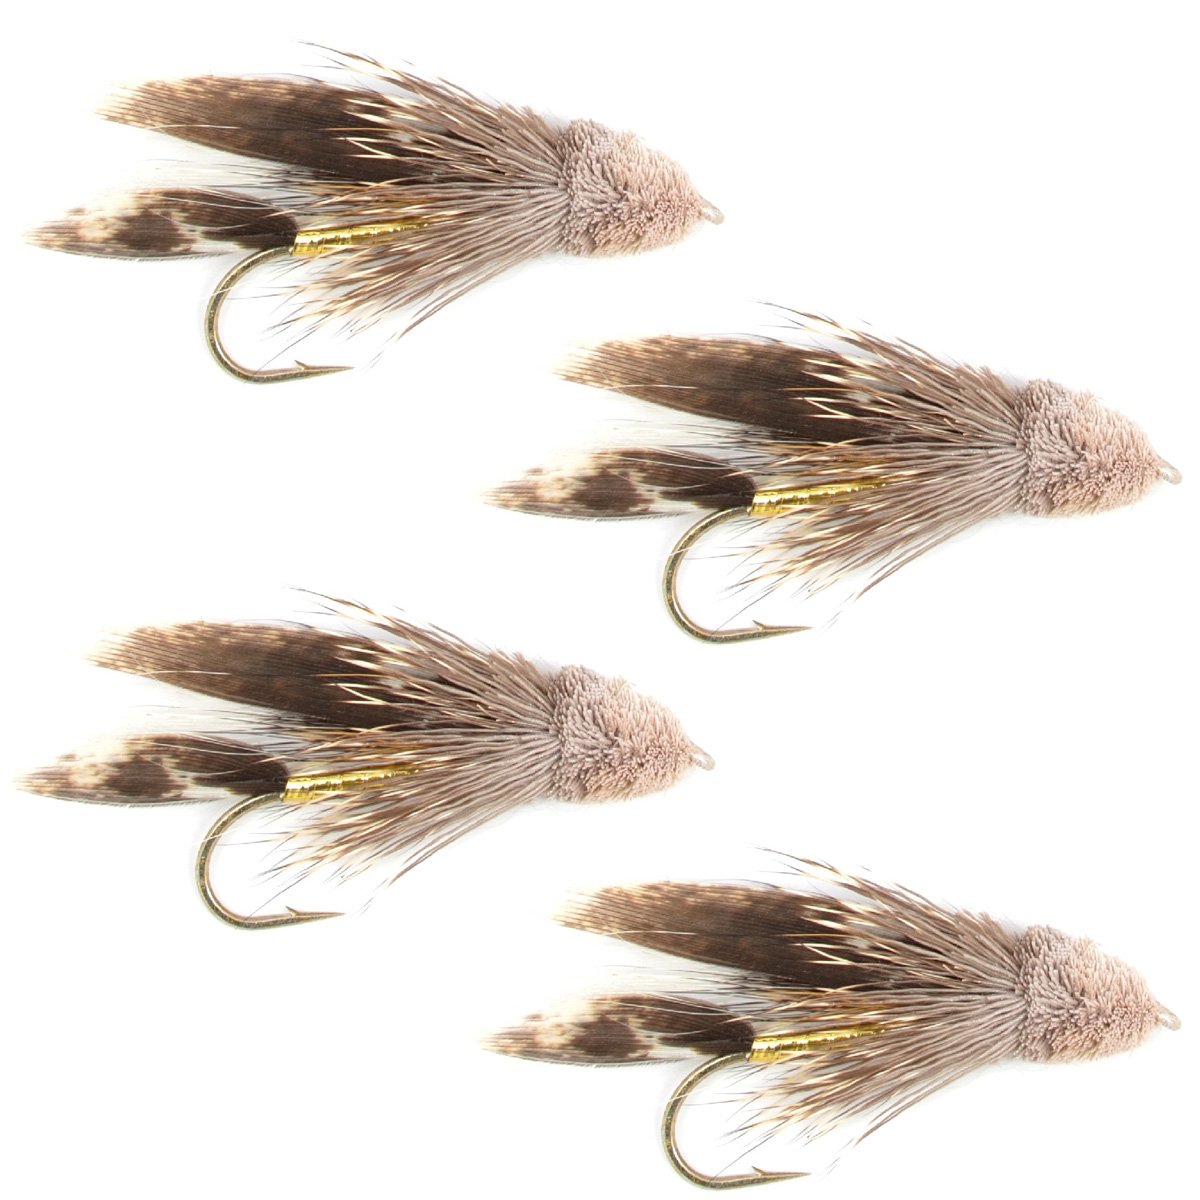 The Fly Fishing Place Muddler Minnow Fly Fishing Flies - Classic